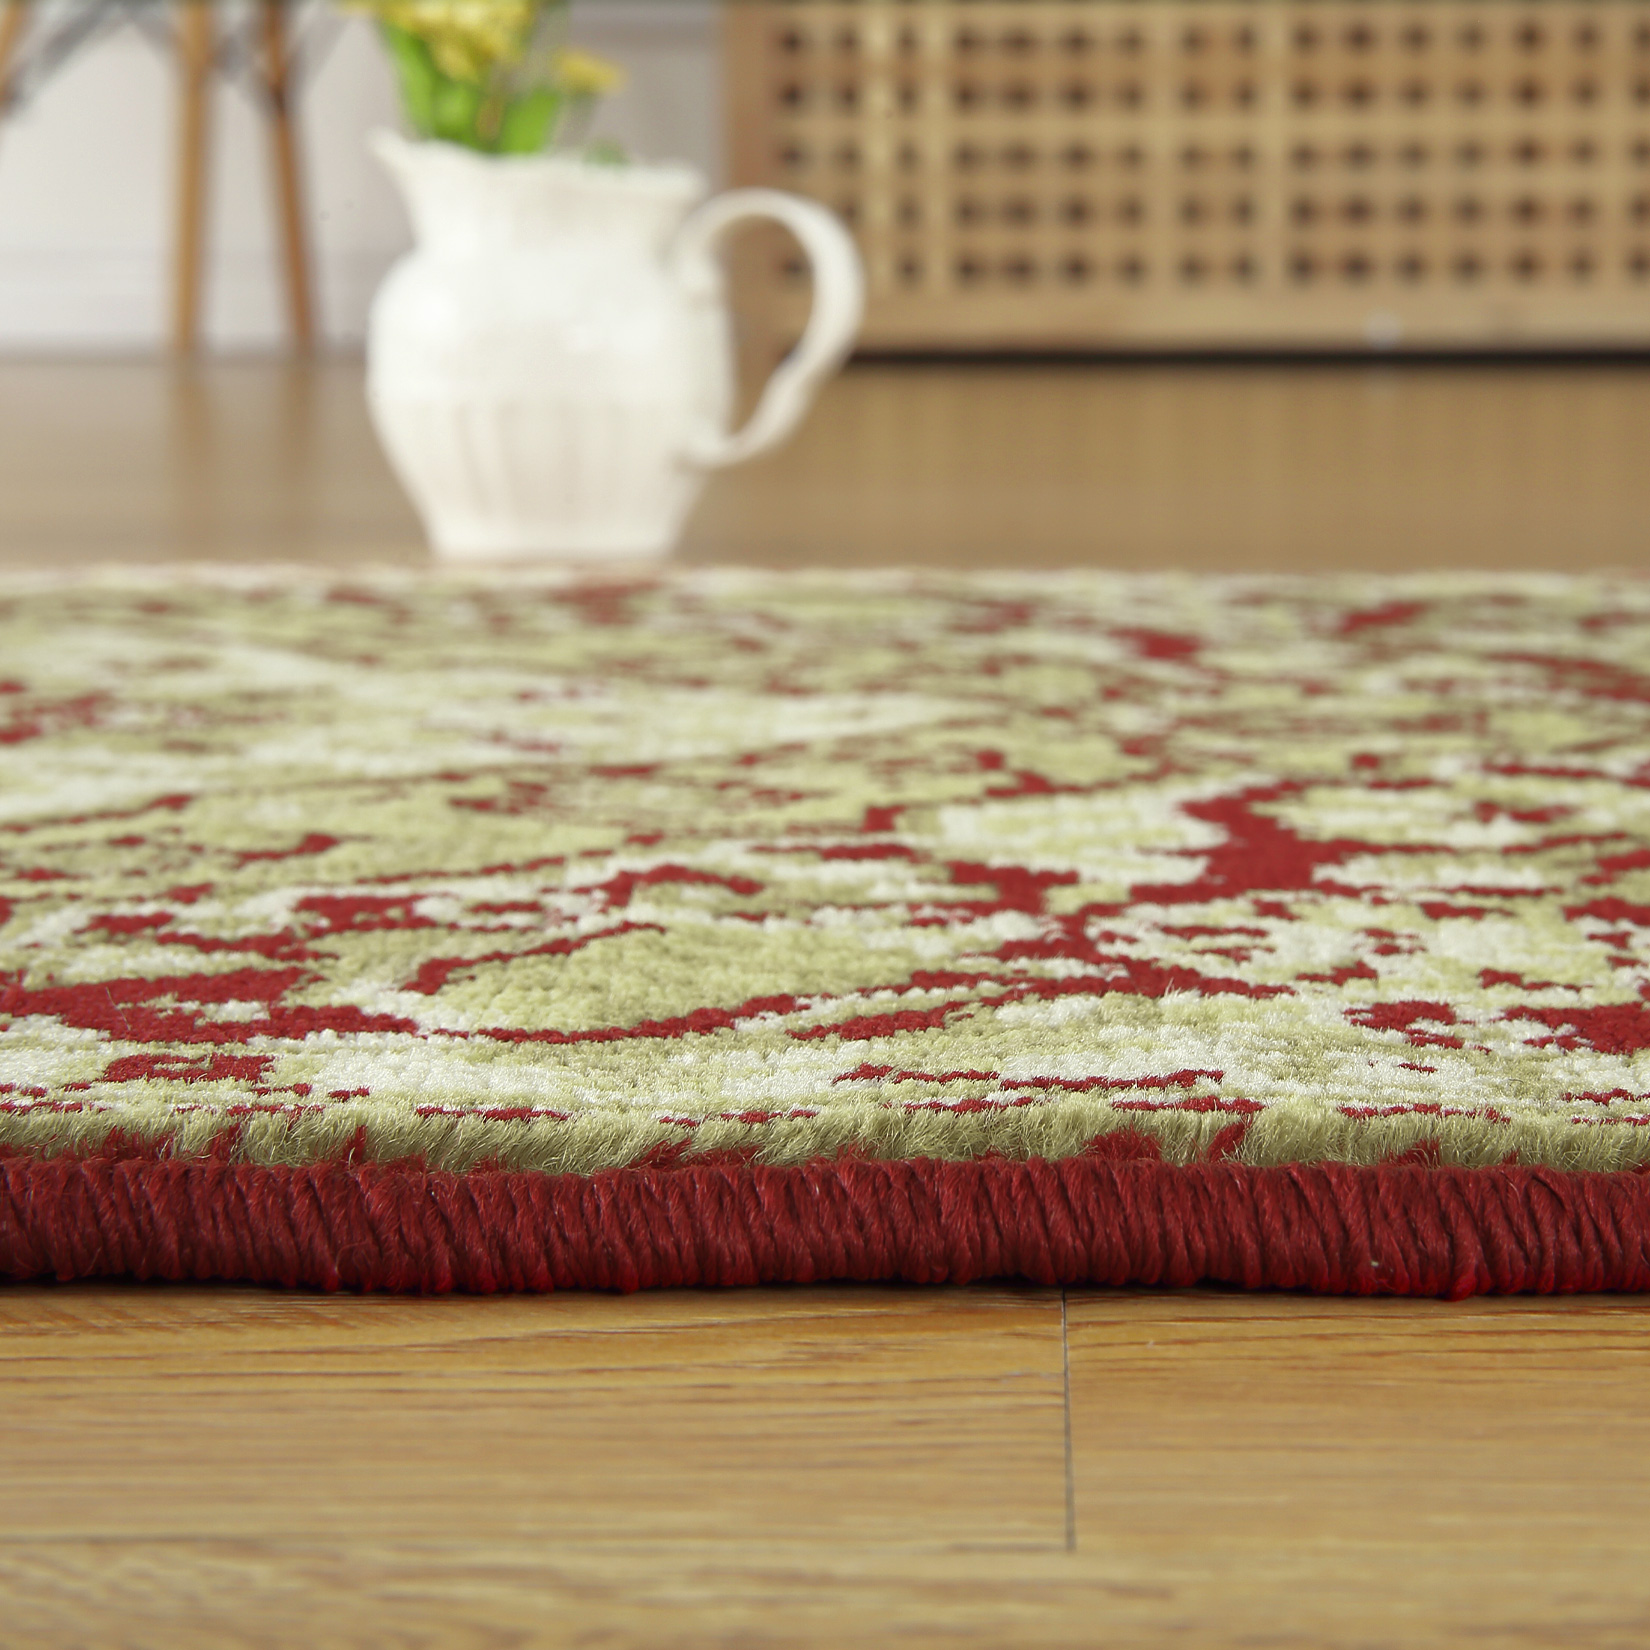 ZACOO 2'x 6' Runner Rug for Kitchen Bedroom Non Slip Persian Area Rug Kitchen Rug Low Pile Distressed Carpet - image 2 of 4